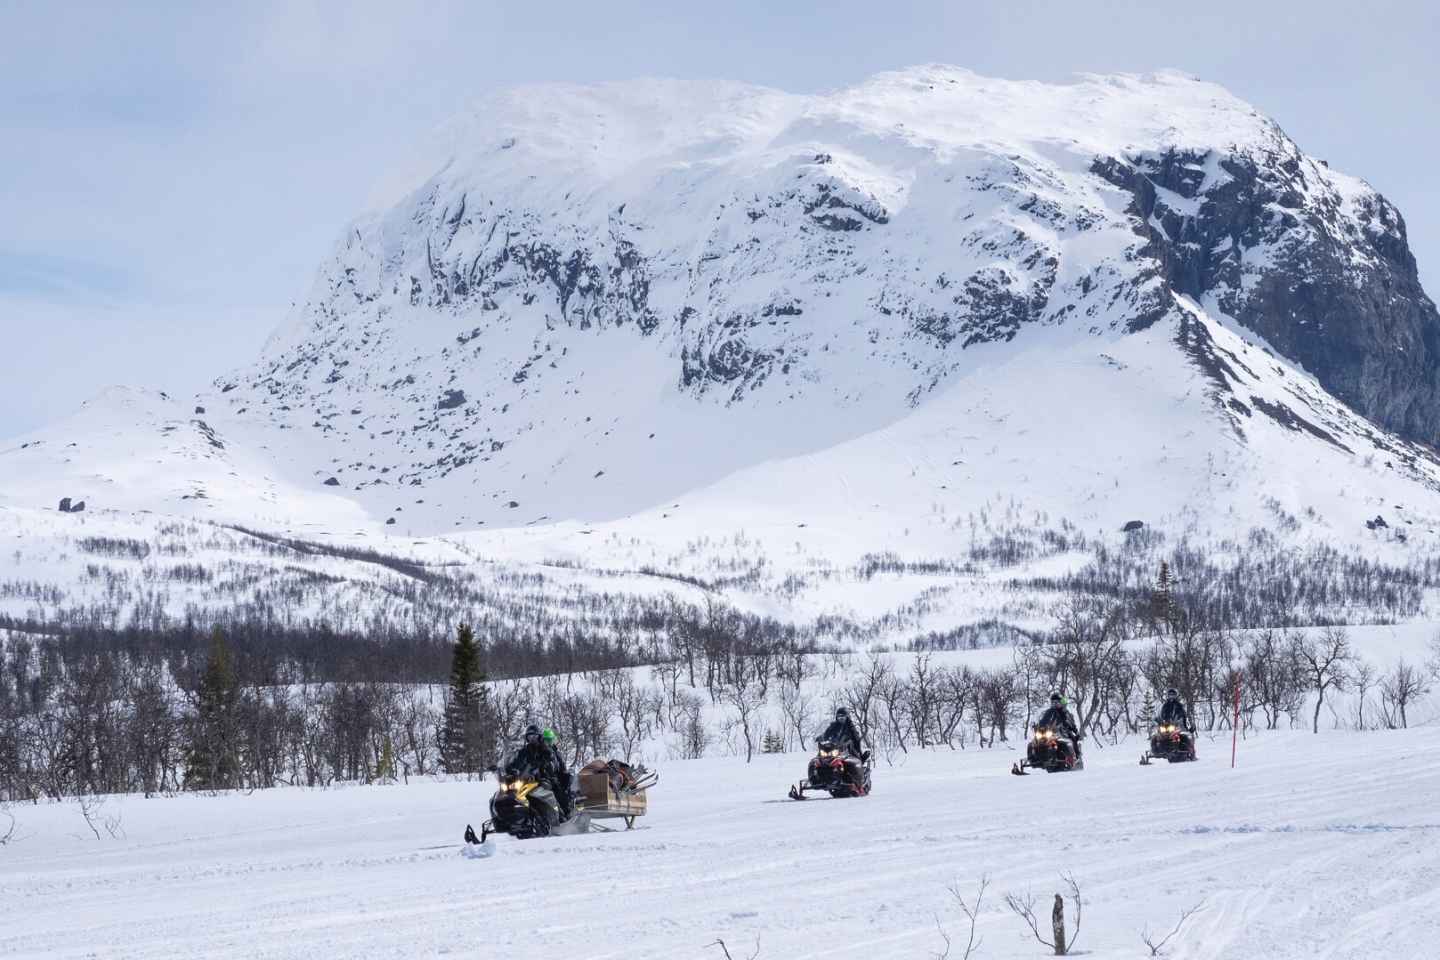 Snowmobile Safari in the mountains of Helgeland!